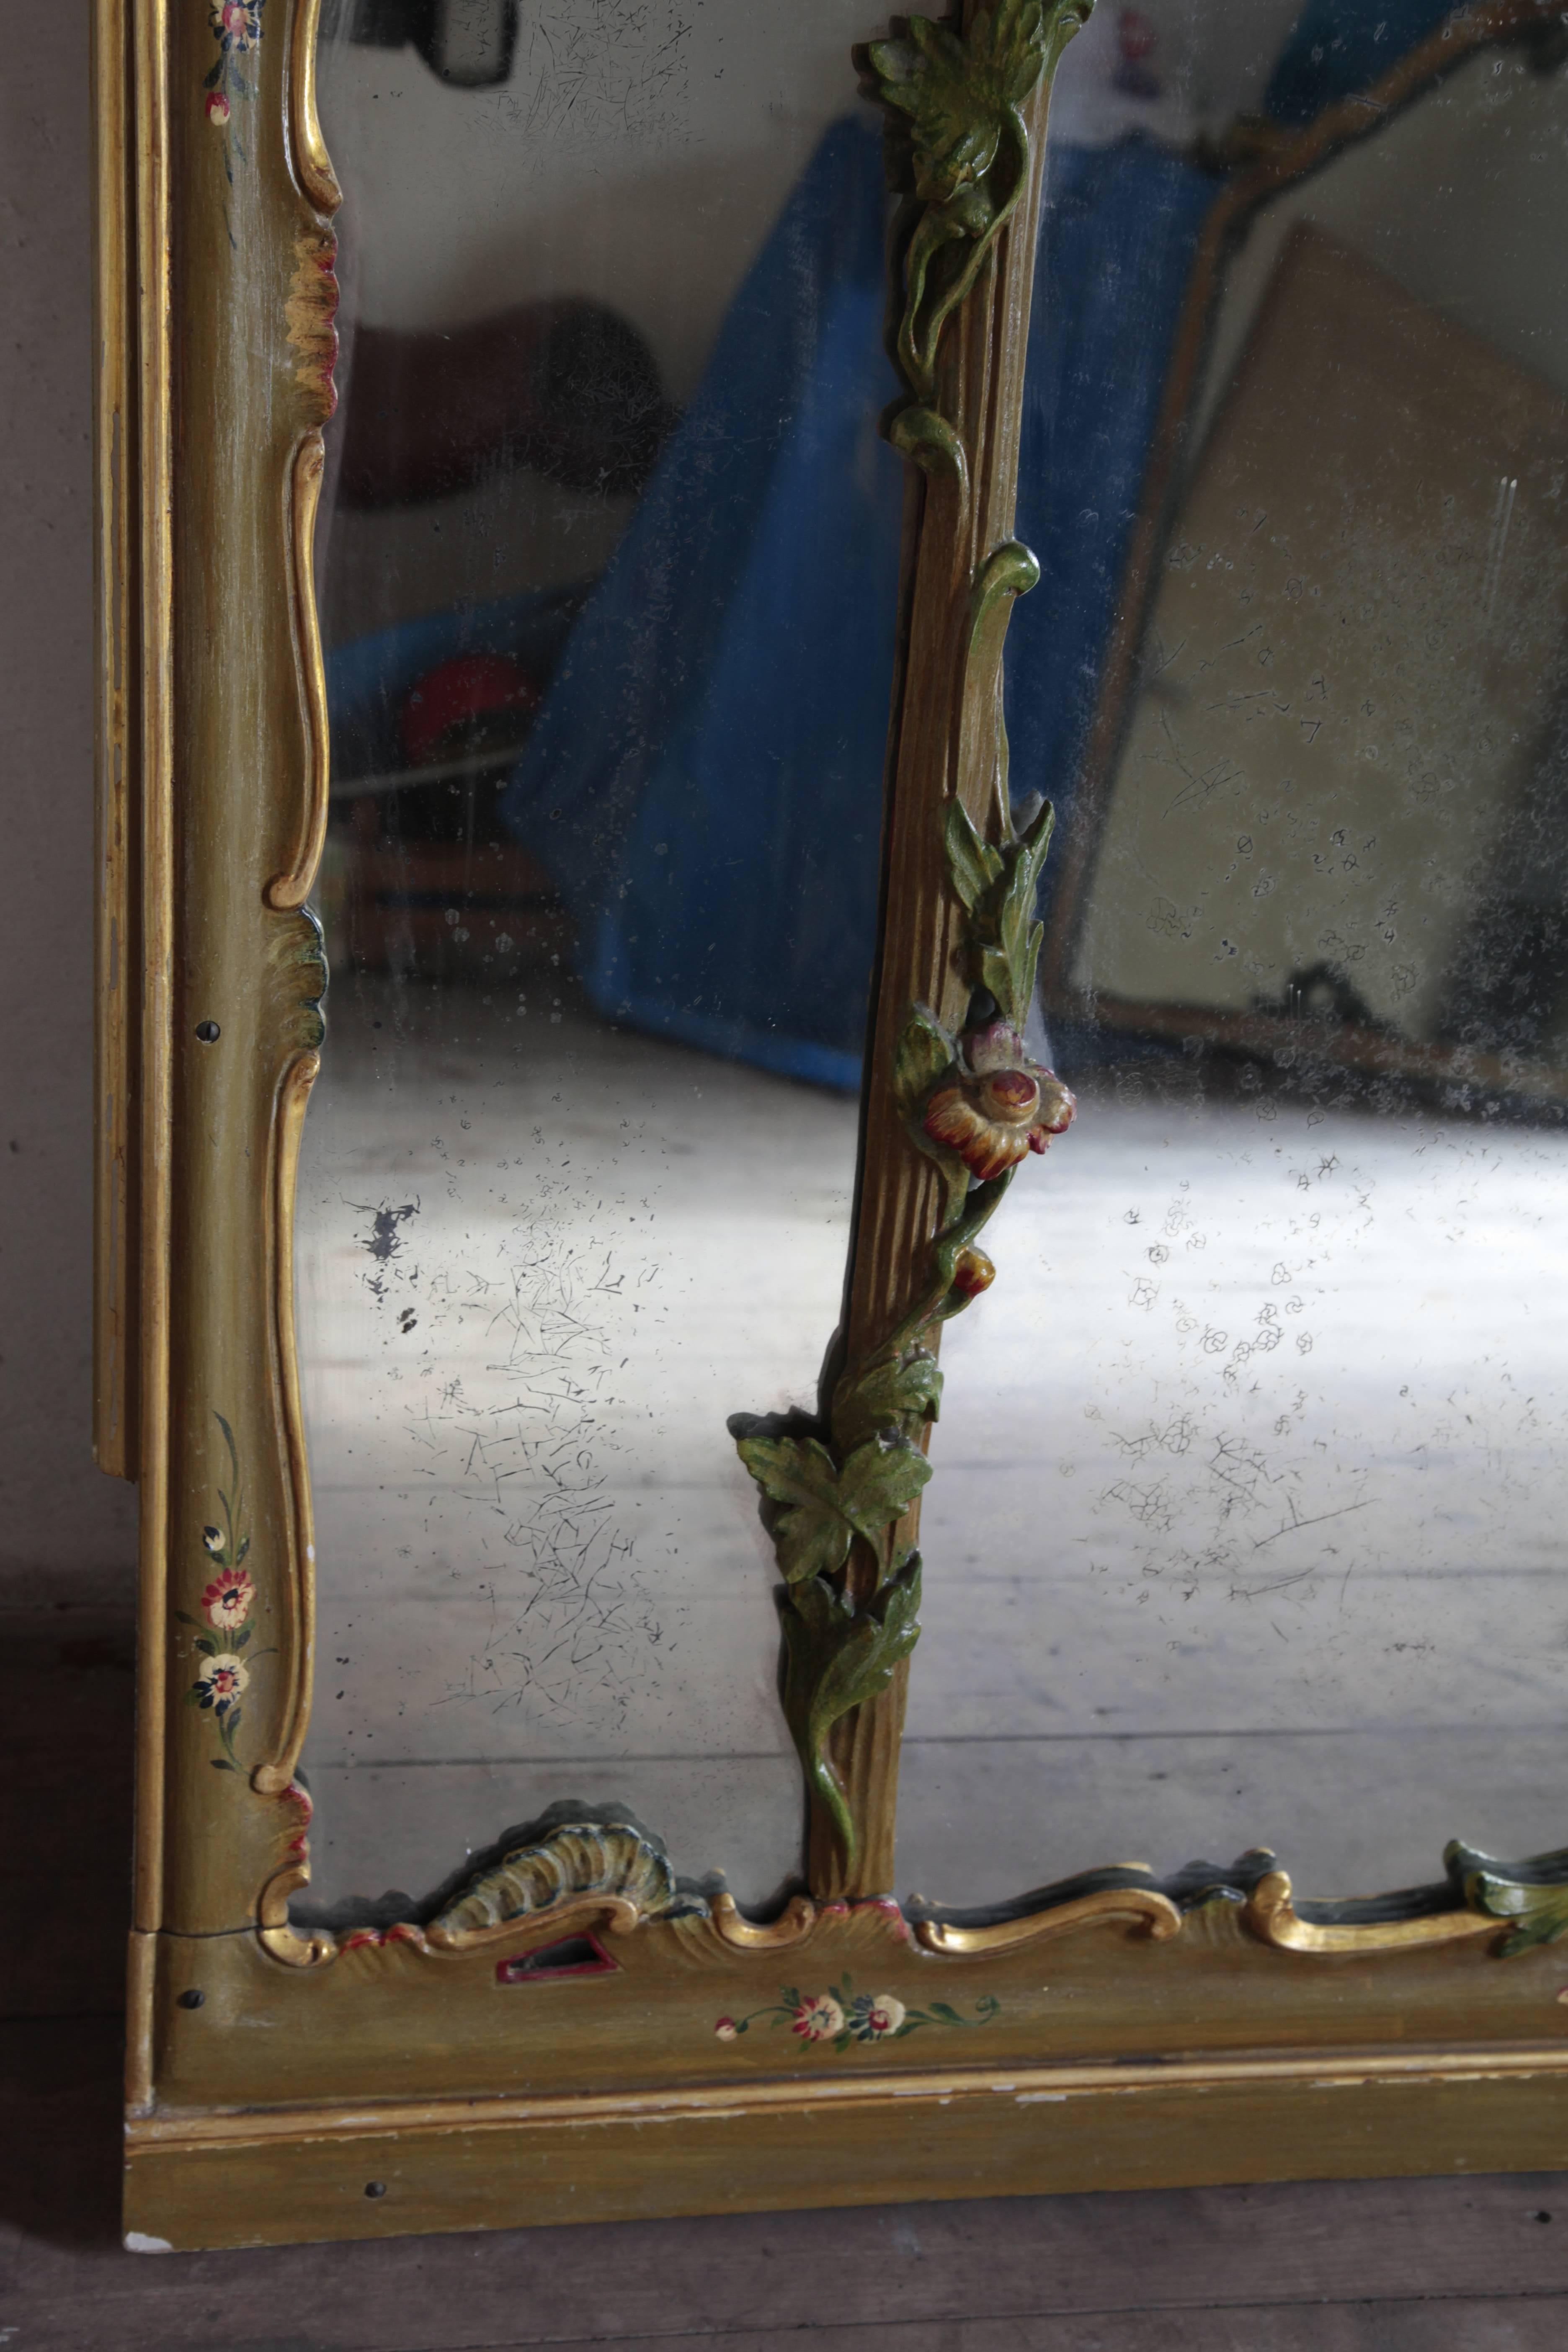 Original Venetian floor mirror, hand-painted and gilded. 

It has some minor discolouration due to age. The paint has small scratches but overall a beautiful piece of historical value.